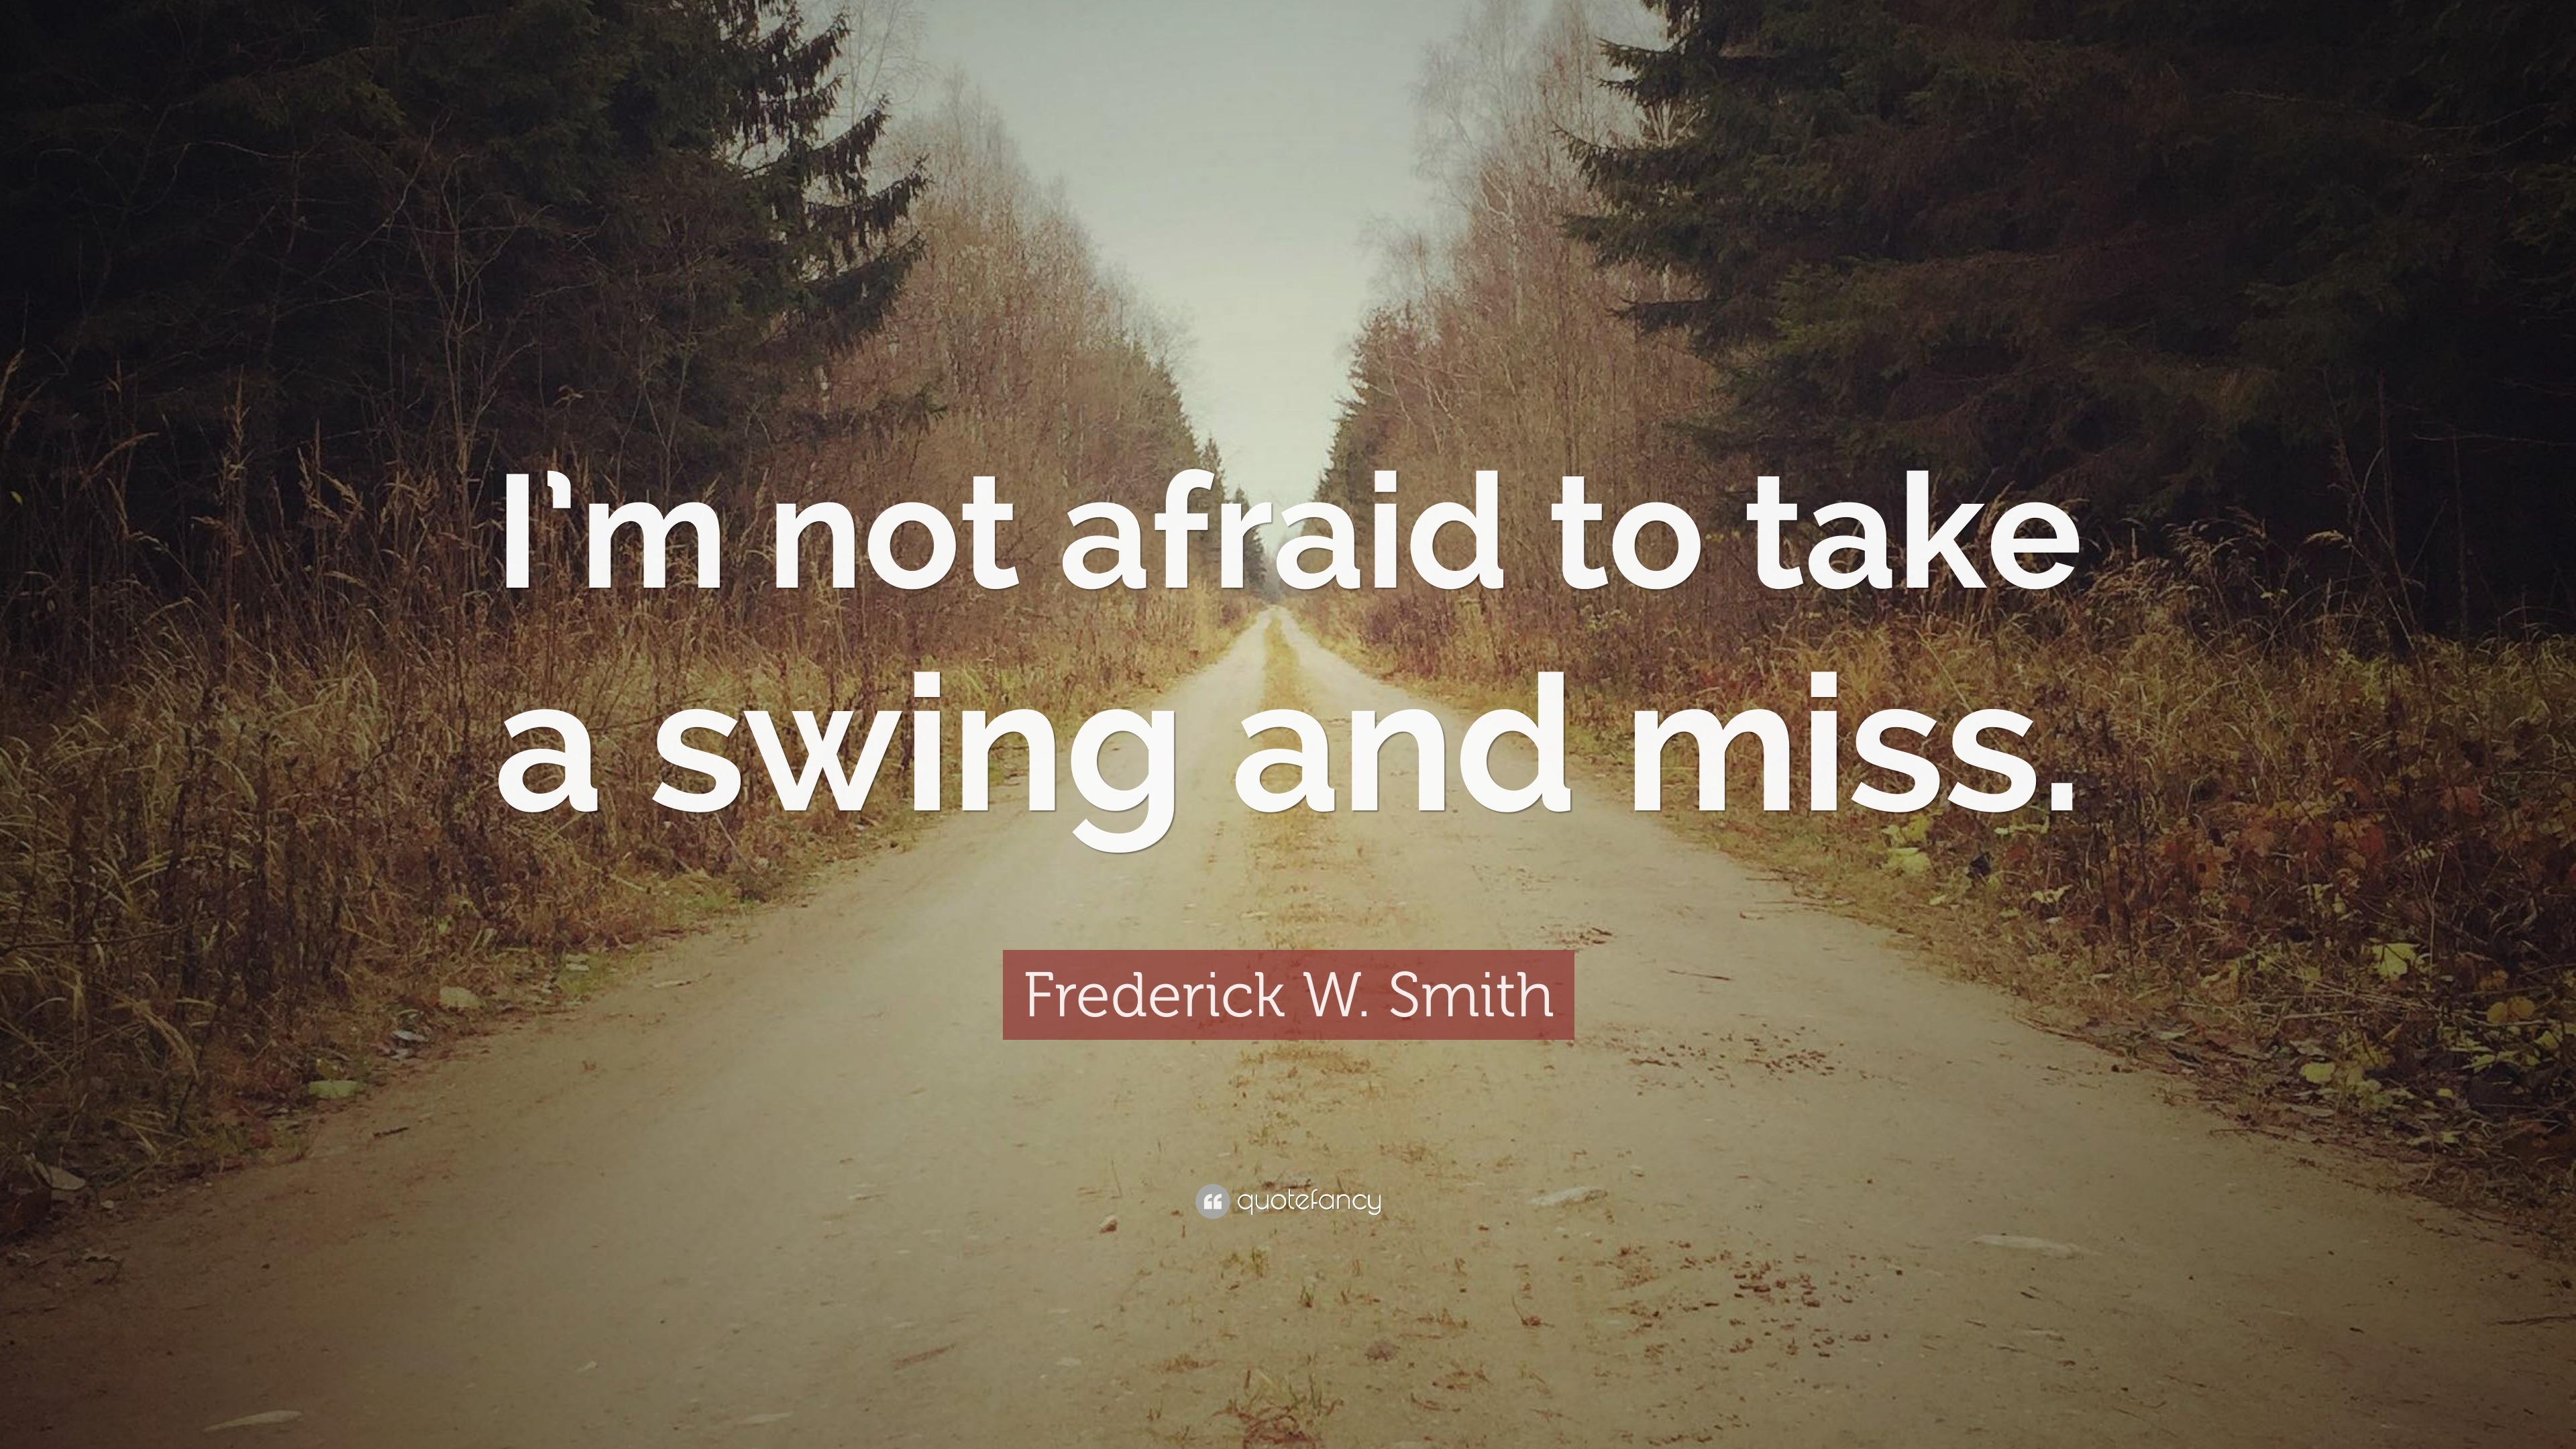 Frederick W. Smith Quote: “I’m not afraid to take a swing and miss.”